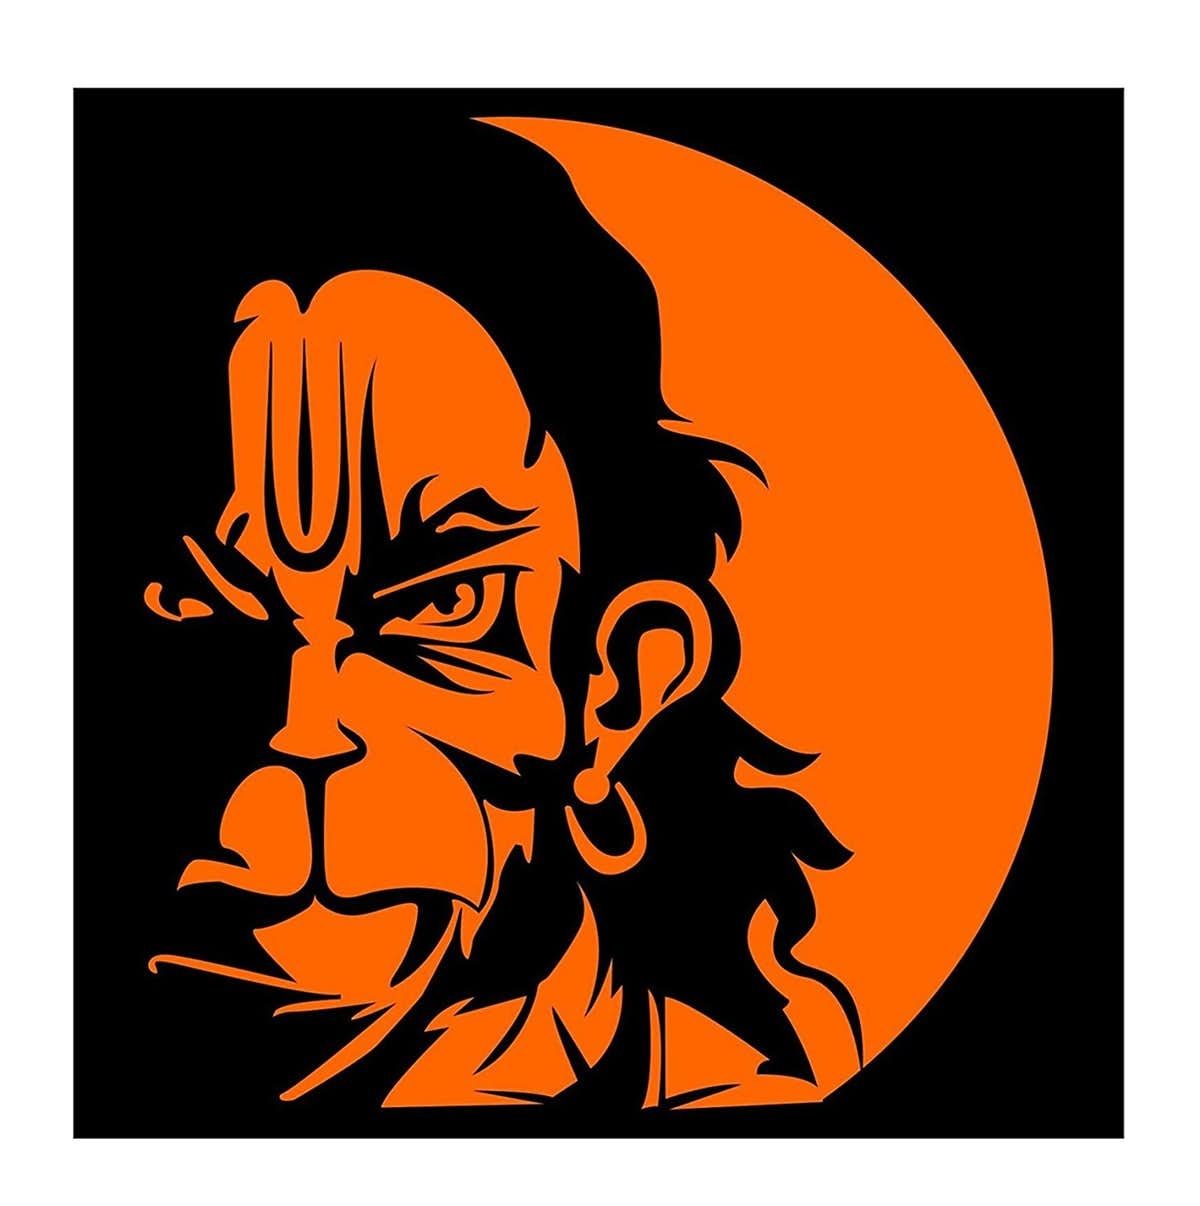 Why Are Today's Gods Angry? Lessons From the 'Angry Hanuman' Image